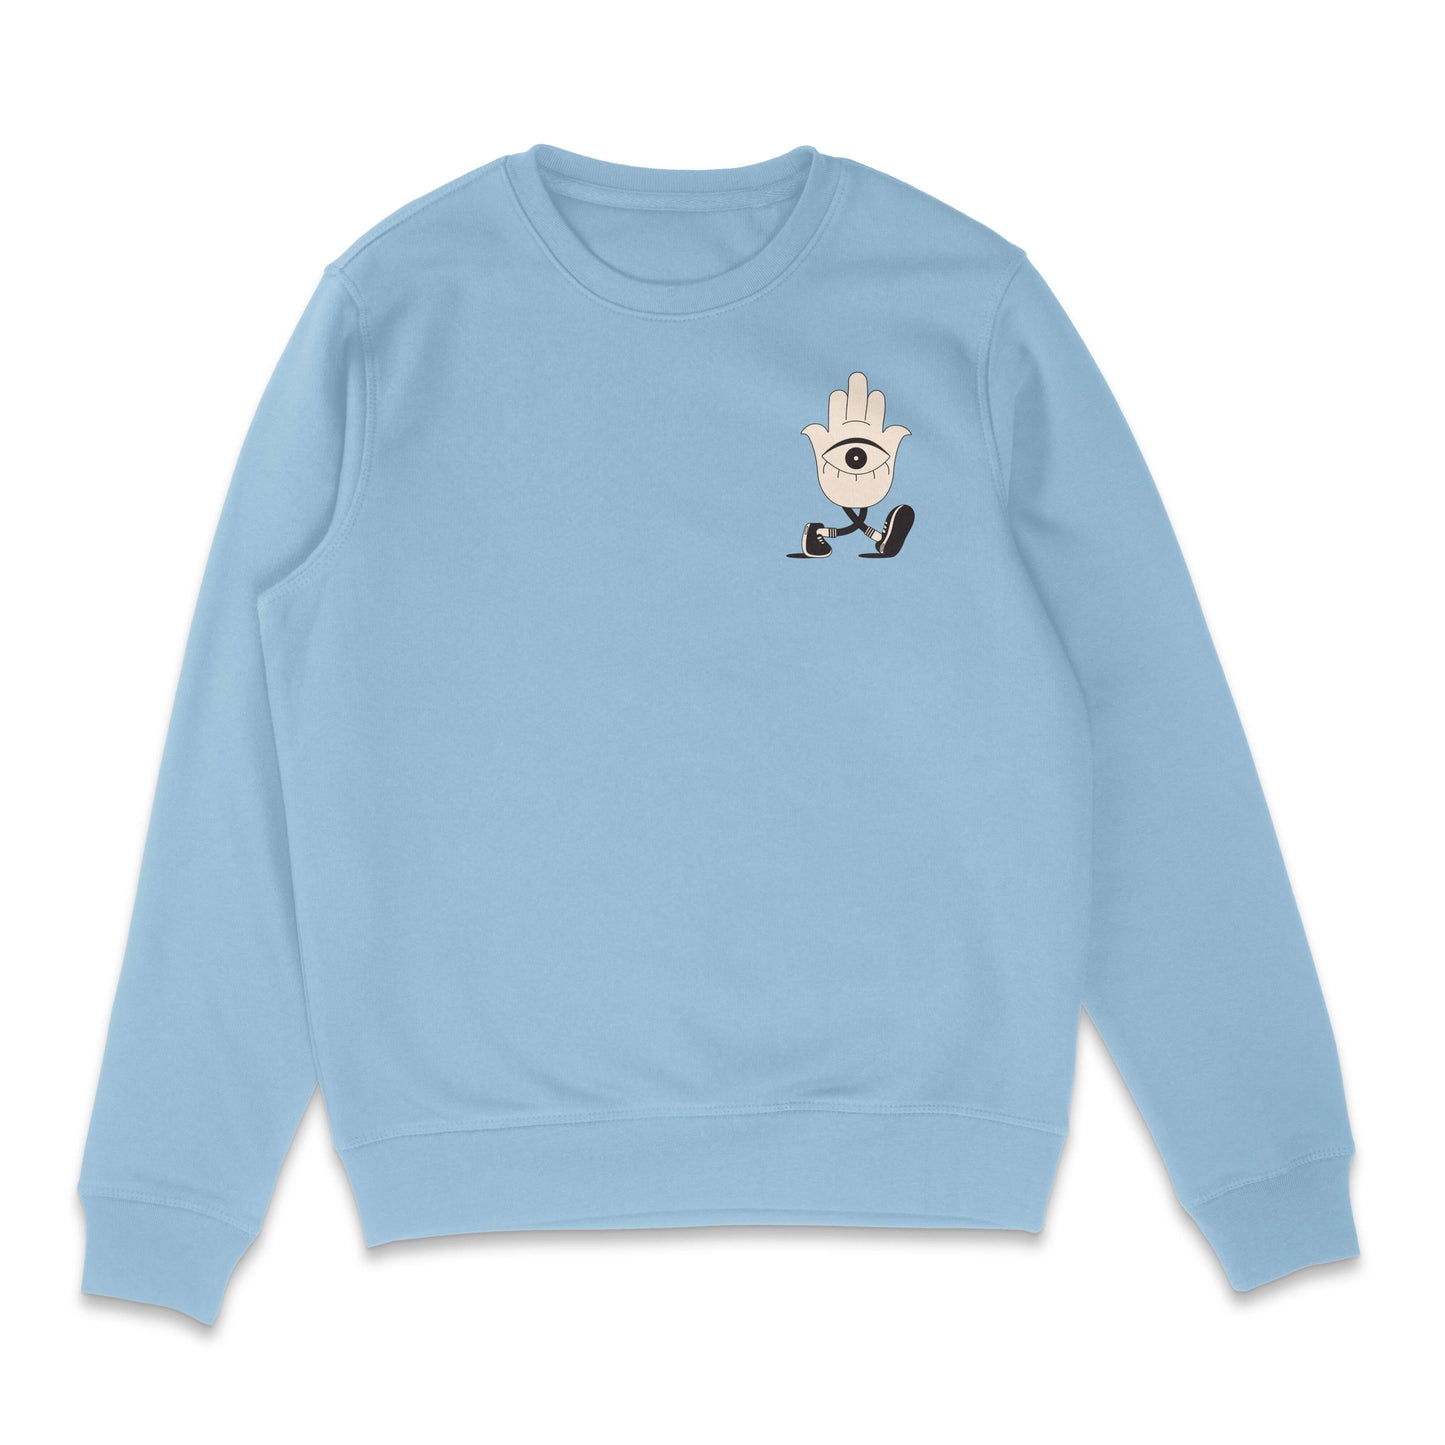 Protect your energy hamsa hand sweater in baby blue front